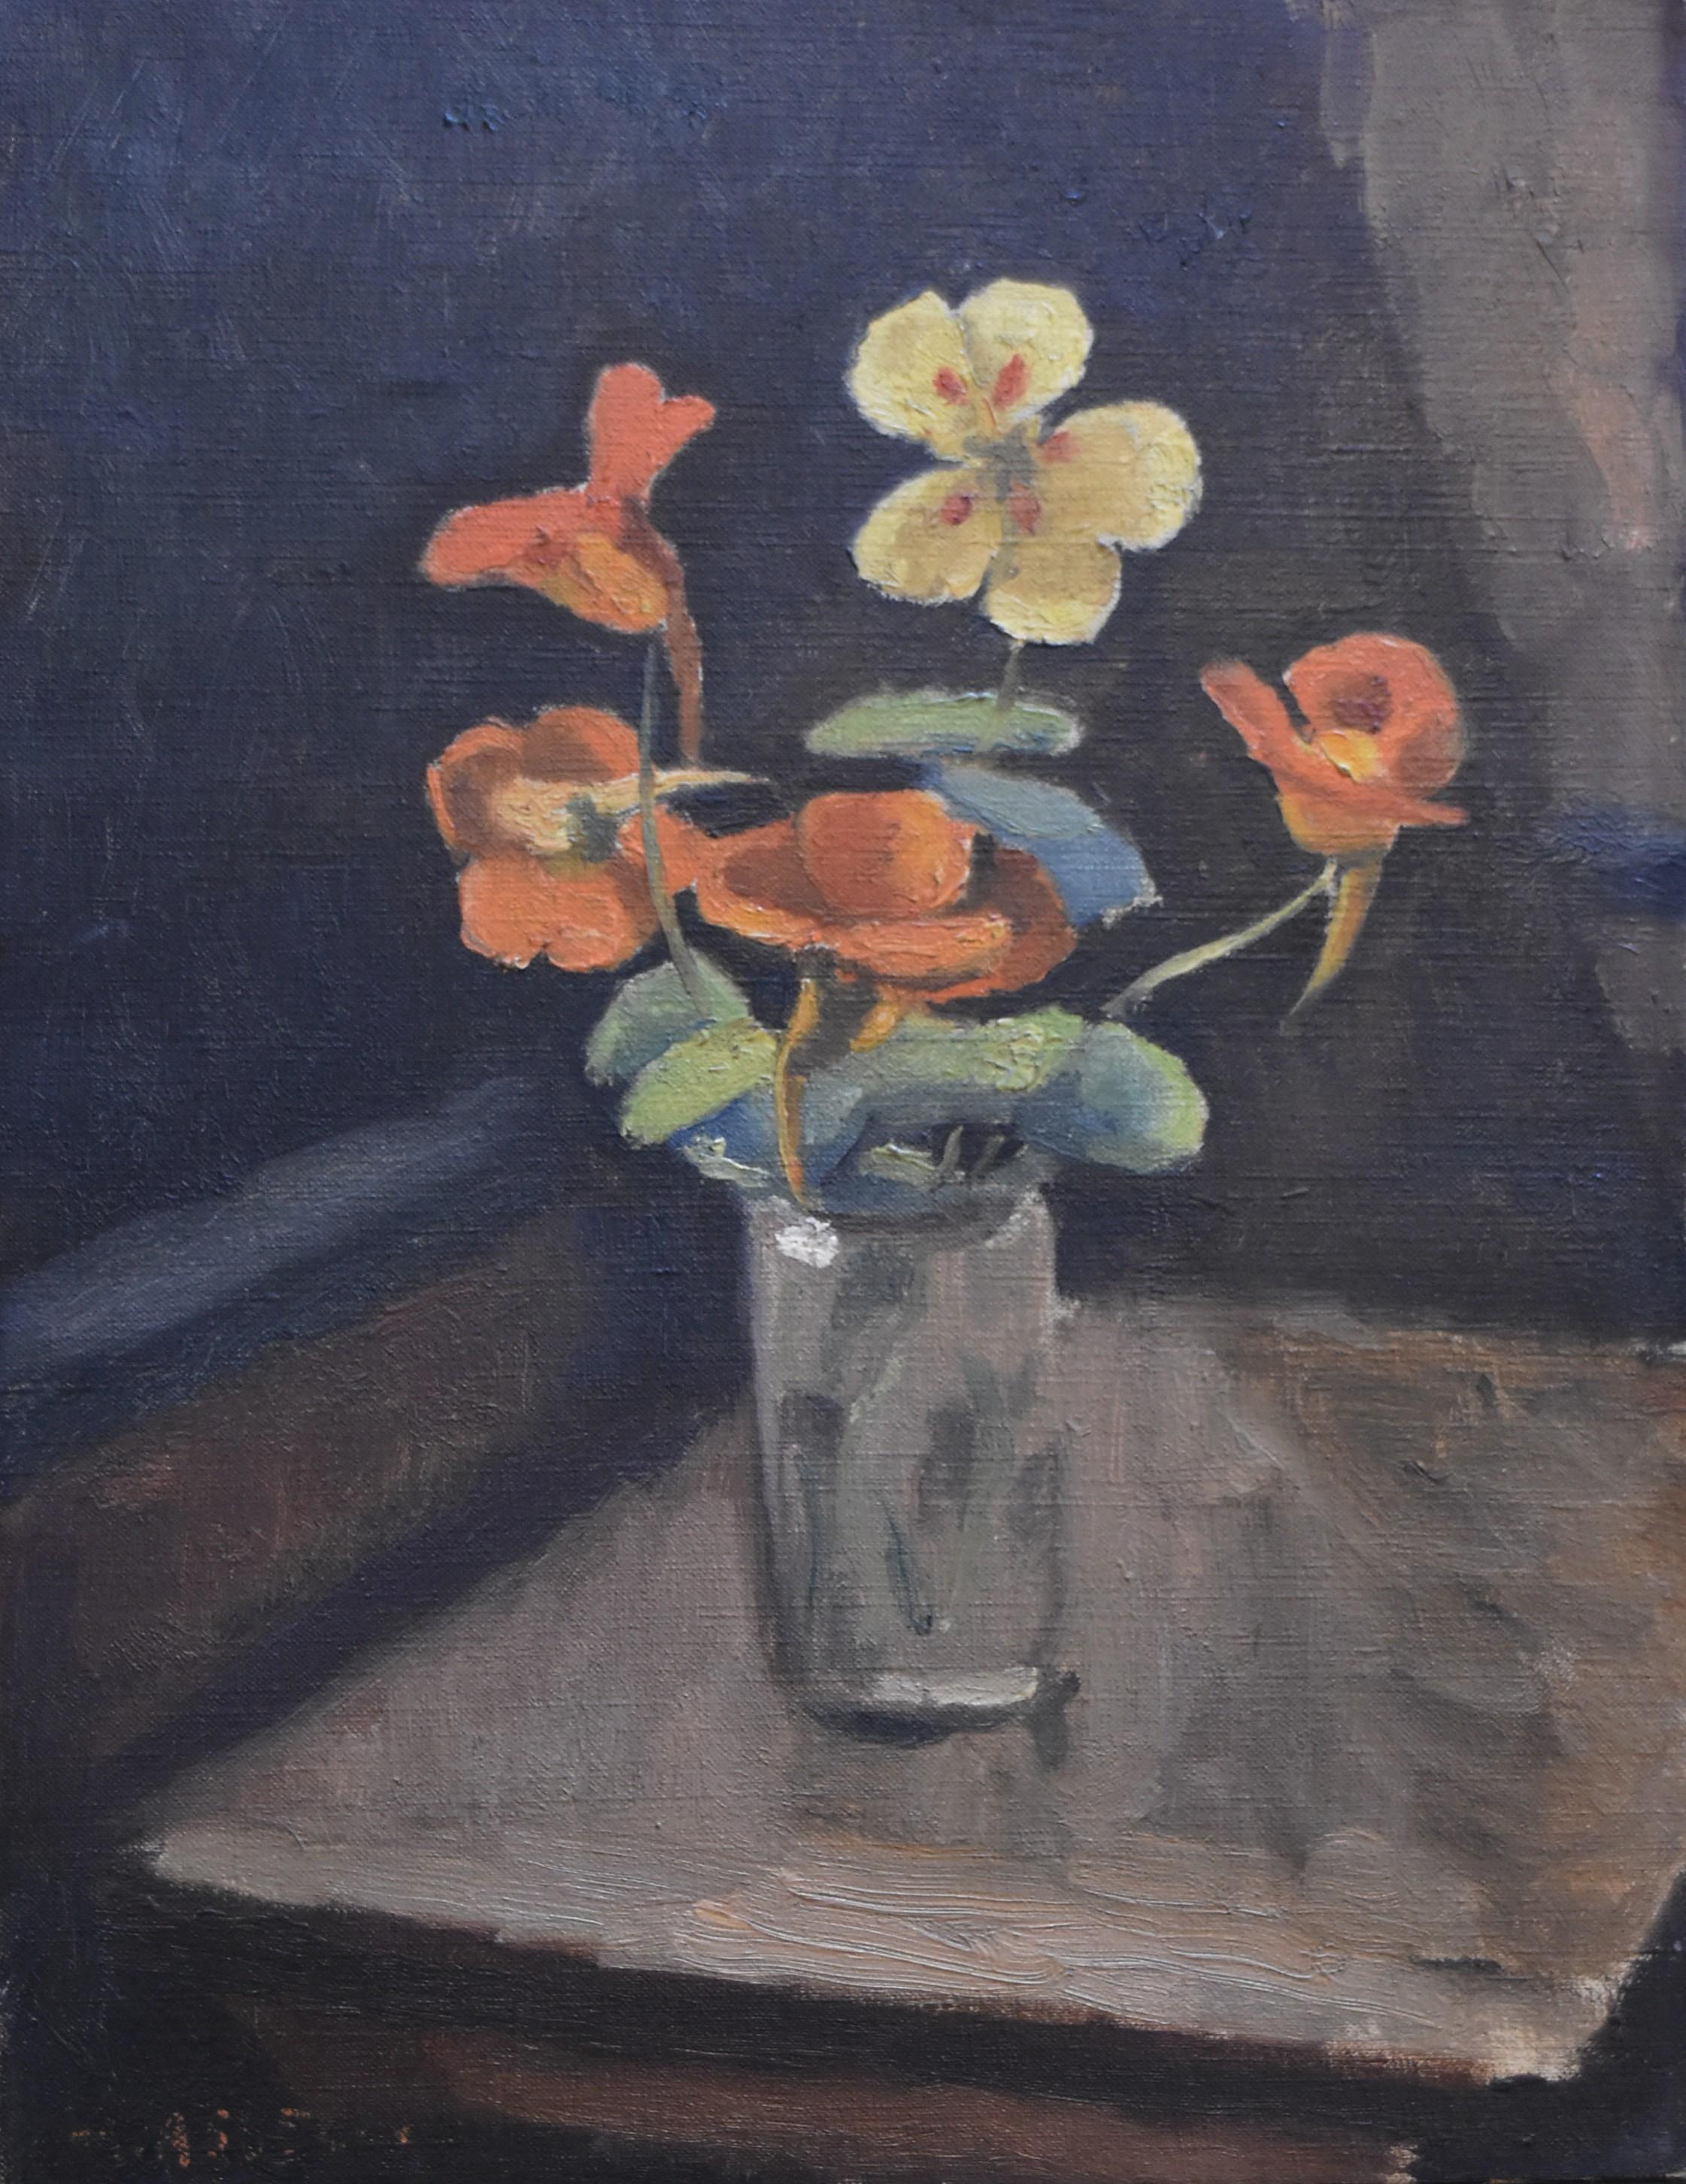 Maurice Asselin (1882-1947) 
Nasturniums in a vase
Signed lower left (signature faded)
Oil on canvas
In good condition
35 x 27 cm
In  a modern frame : 44 x 36 cm 

Maurice Asselin is a painter and engraver, member of the "Ecole de Paris" .
For the